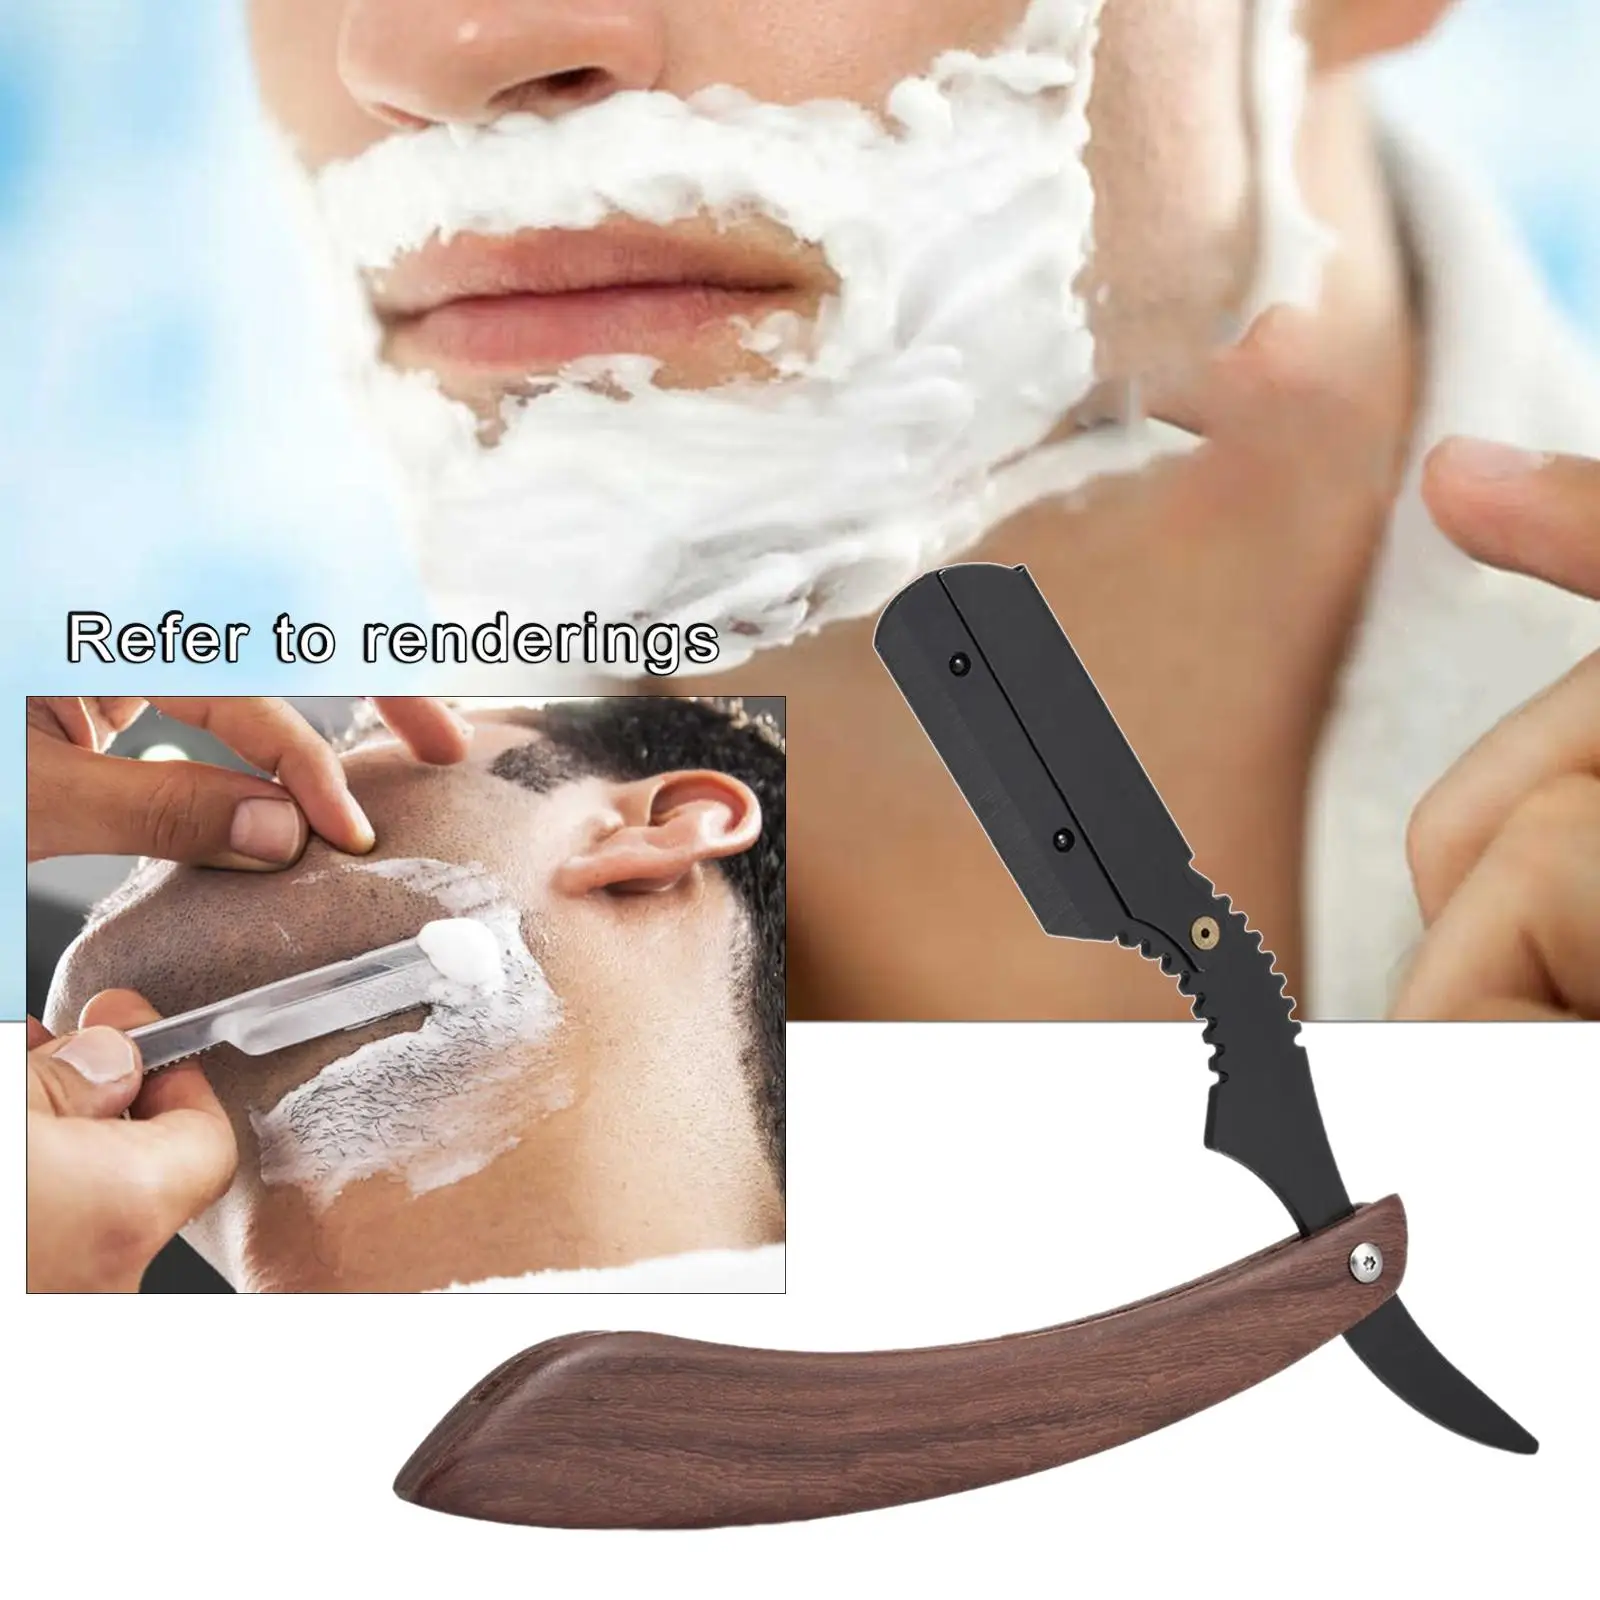 Folding   for  Handle Stainless Steel for Barbershop  Hair Remover Professional Durable Comfortable Grip